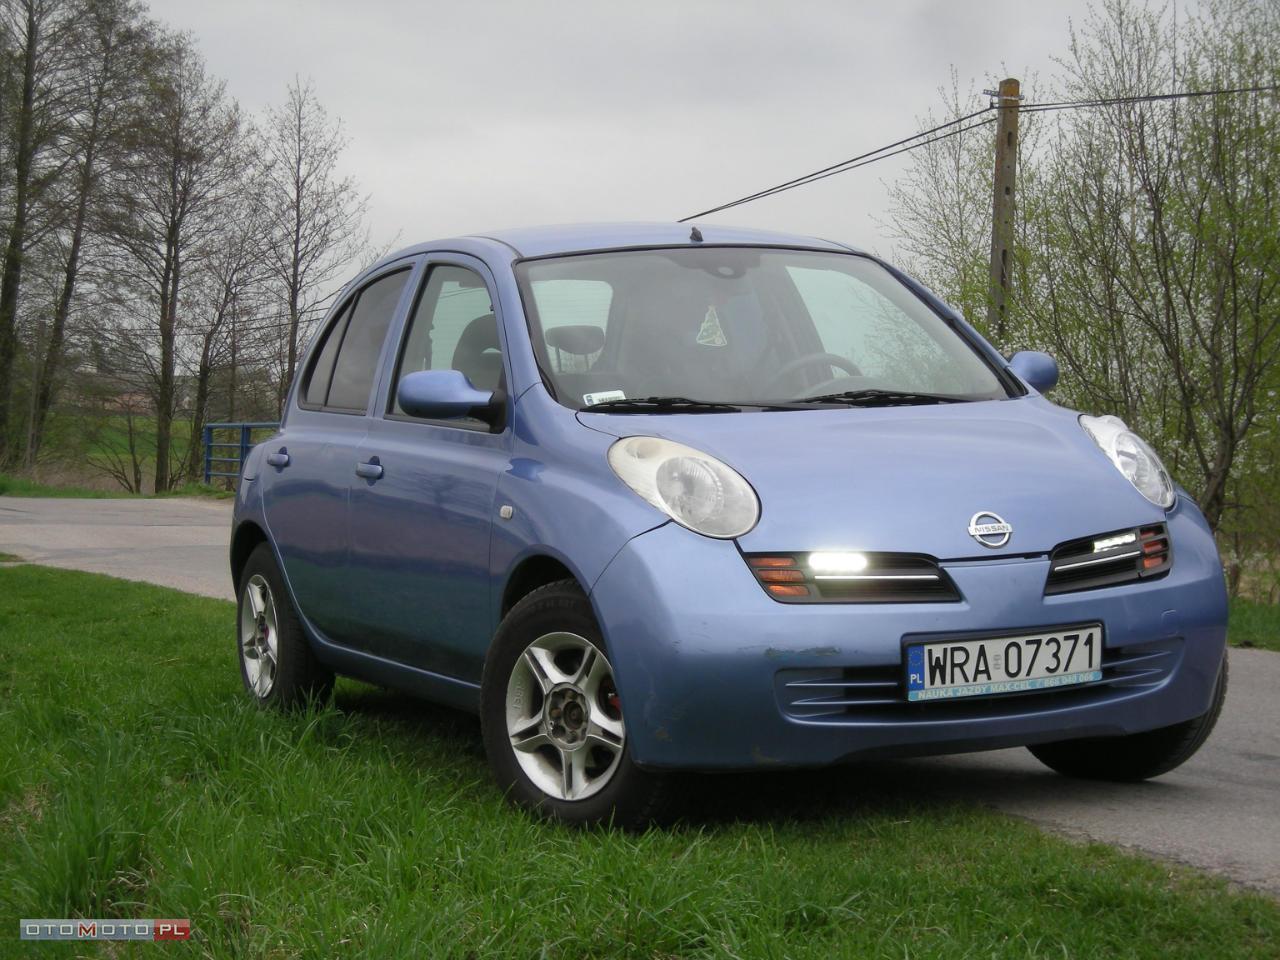 Nissan Micra 1.4B/G limited